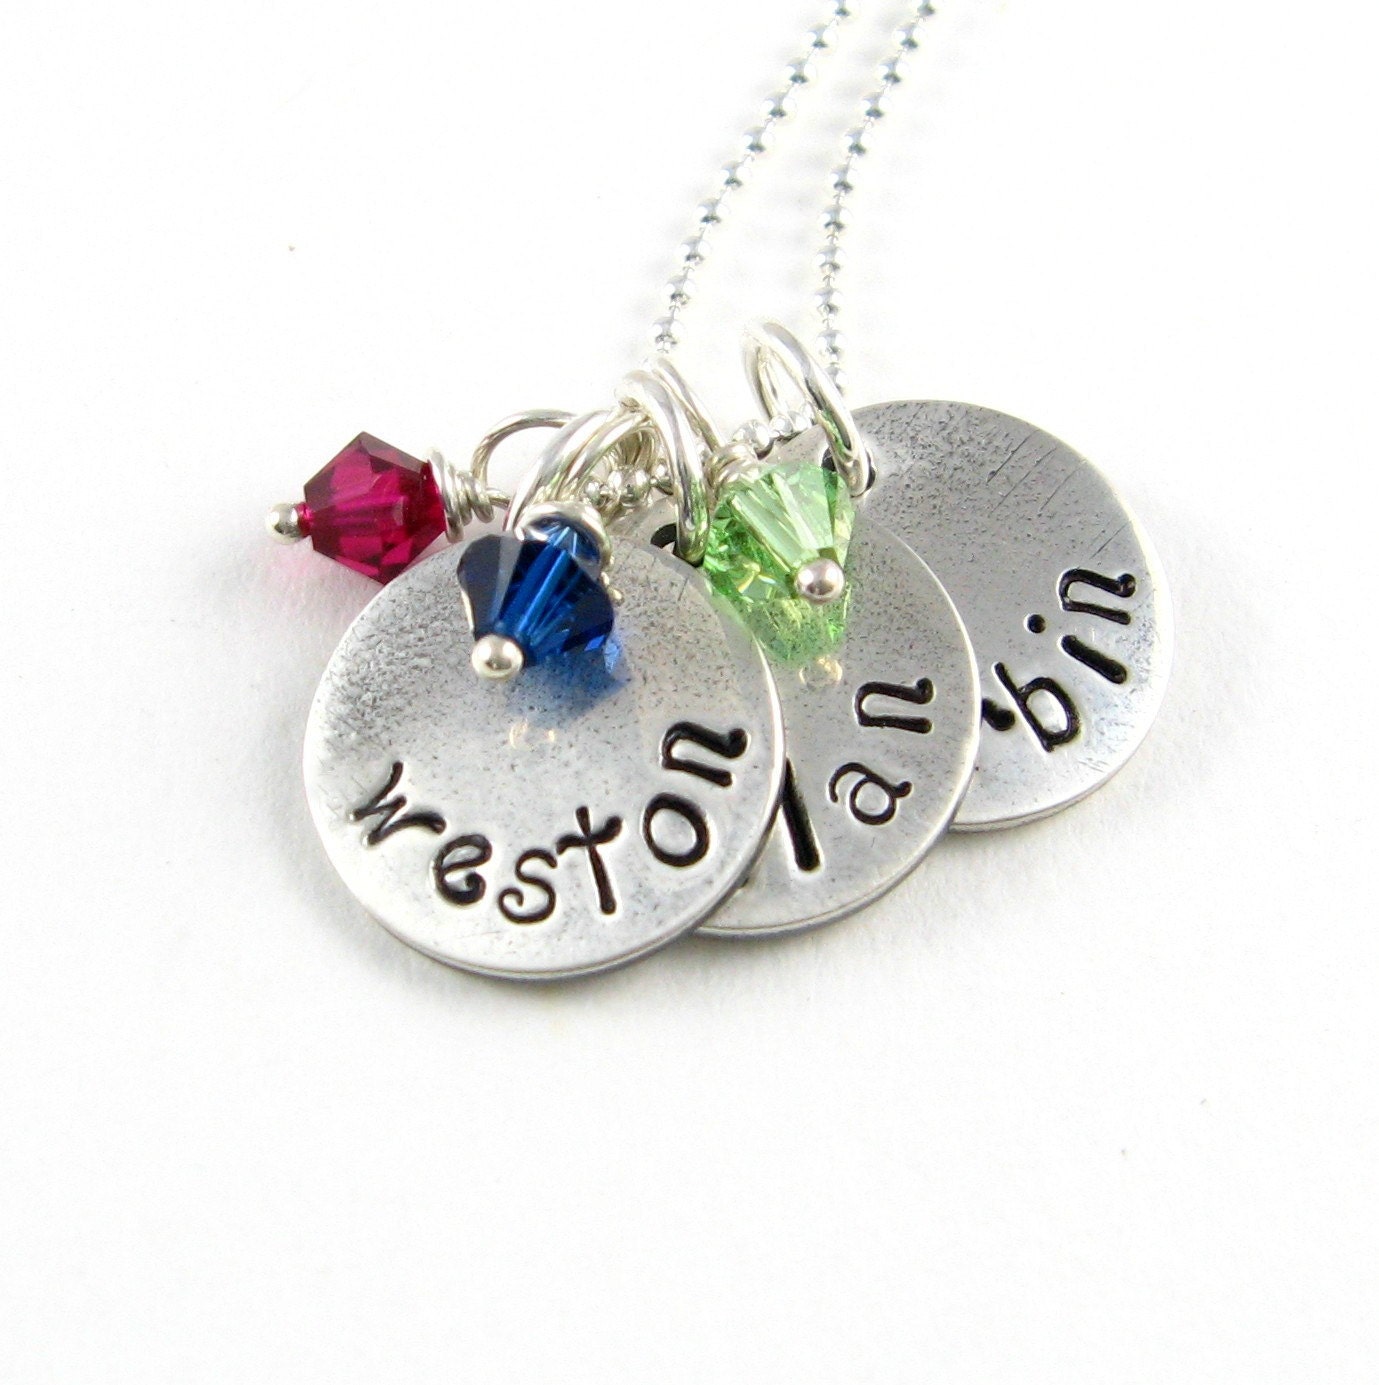 Zales Personalized Necklaces â€“ Personalized Gifts for Men and More.